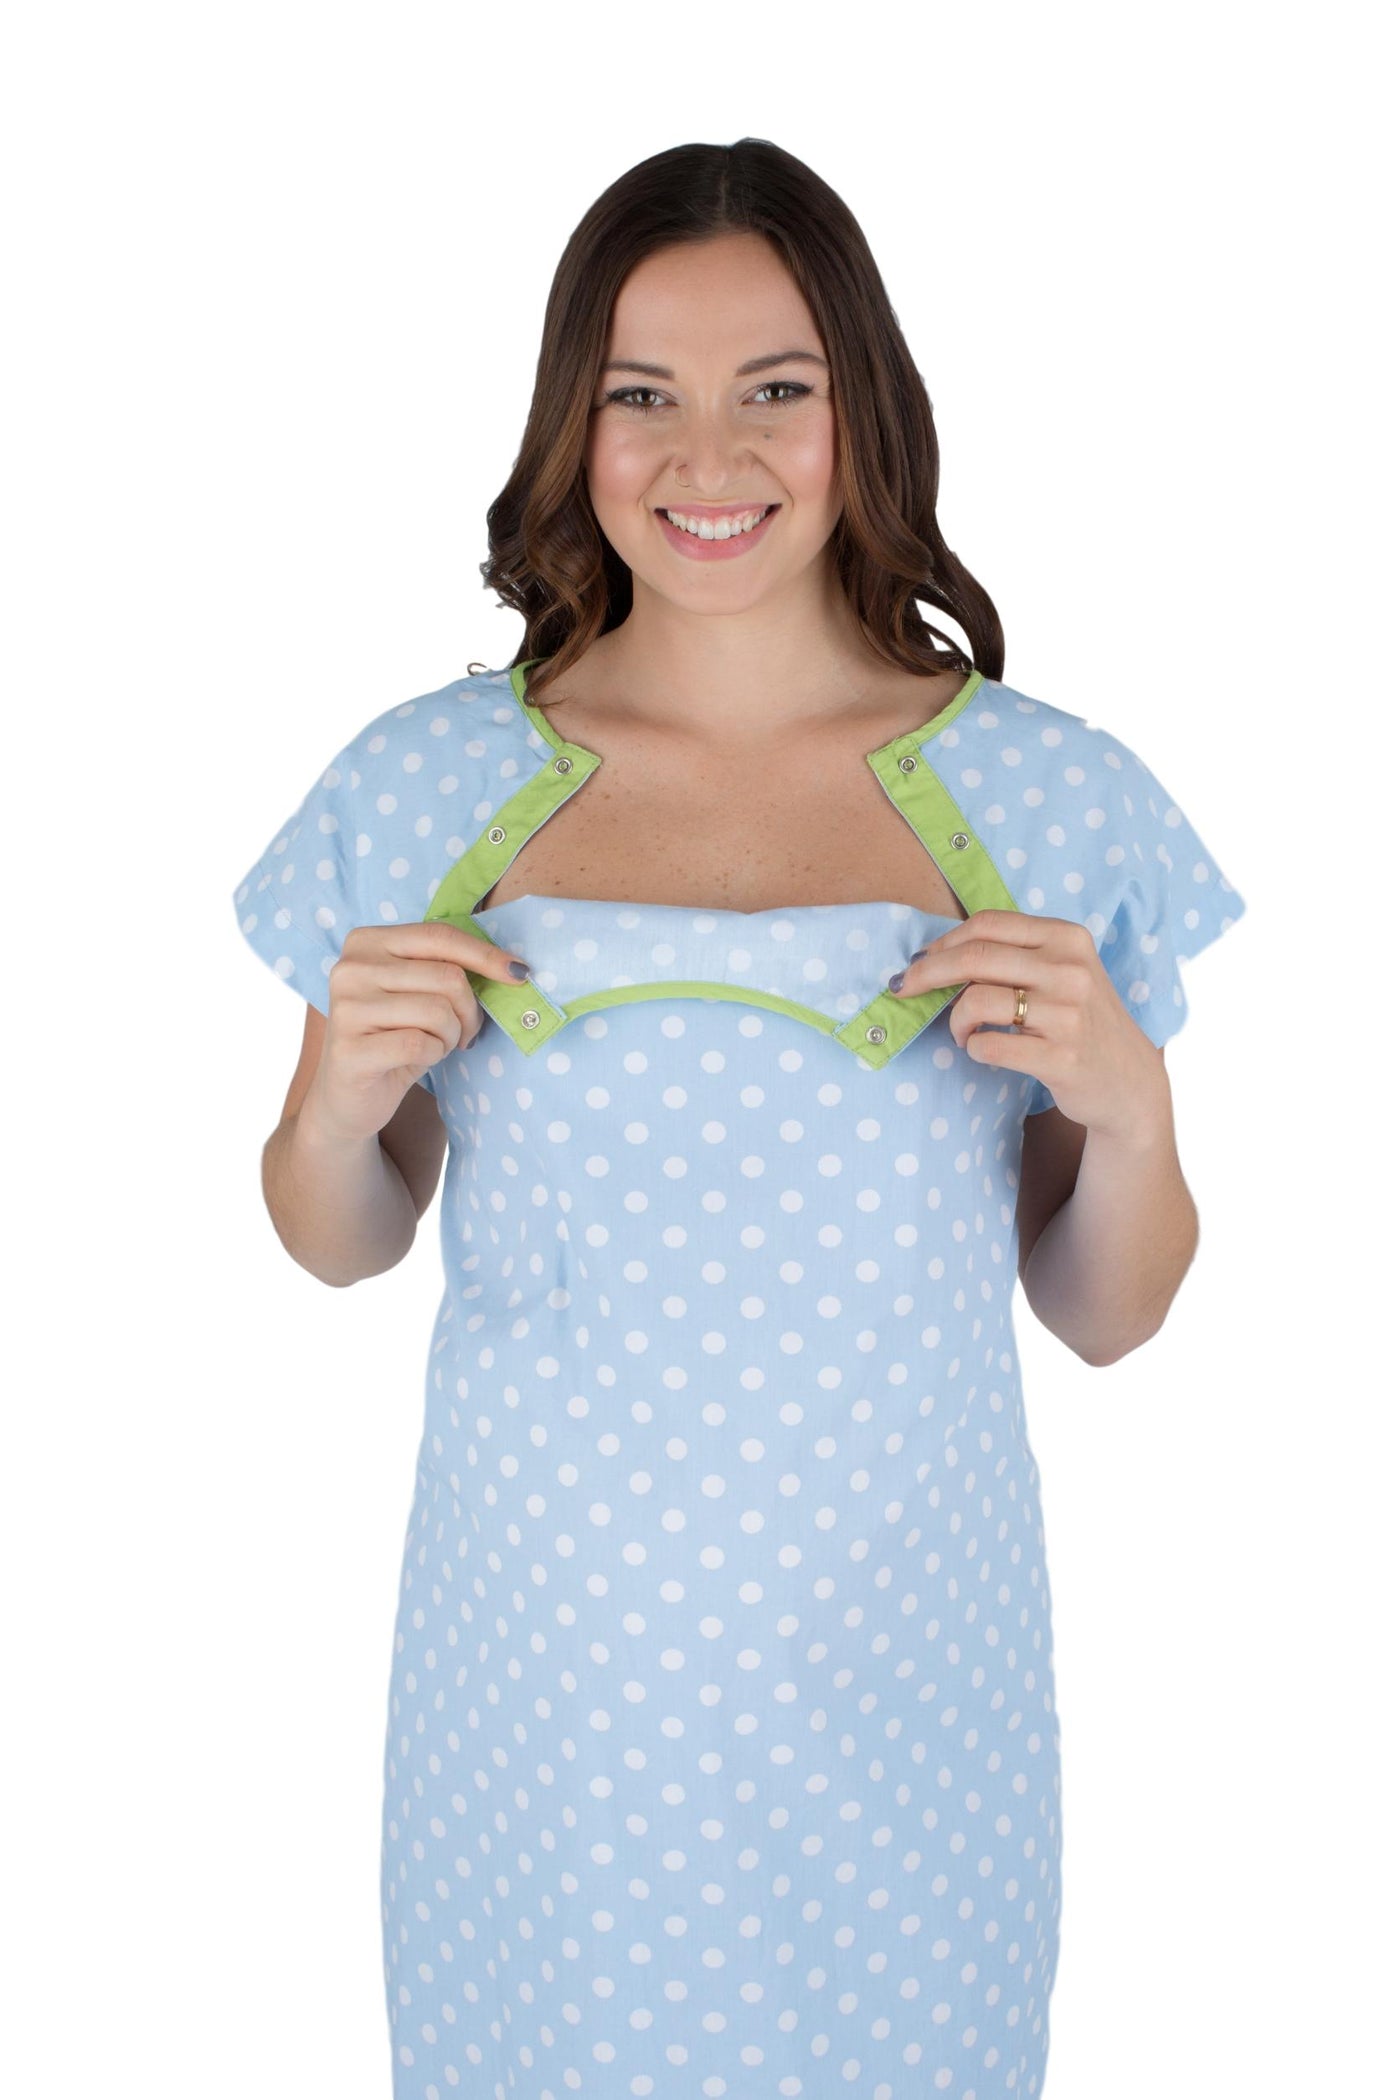 Mae Gownie Maternity Delivery Labor Hospital Birthing Gown